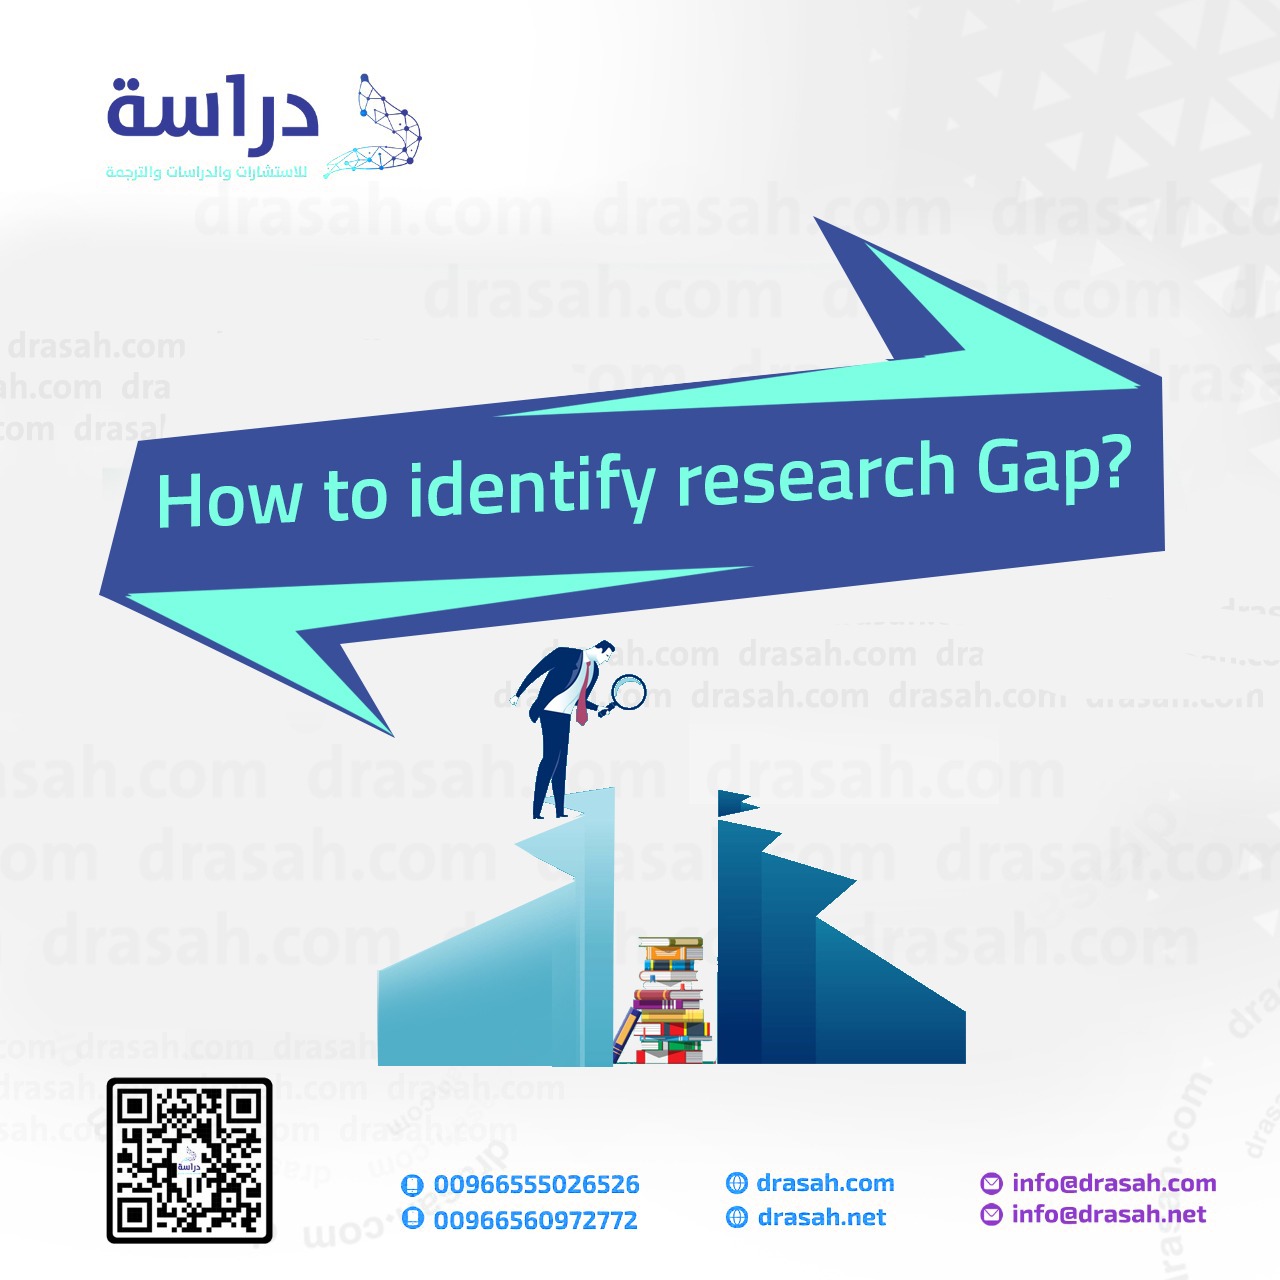 How to identify research Gap?